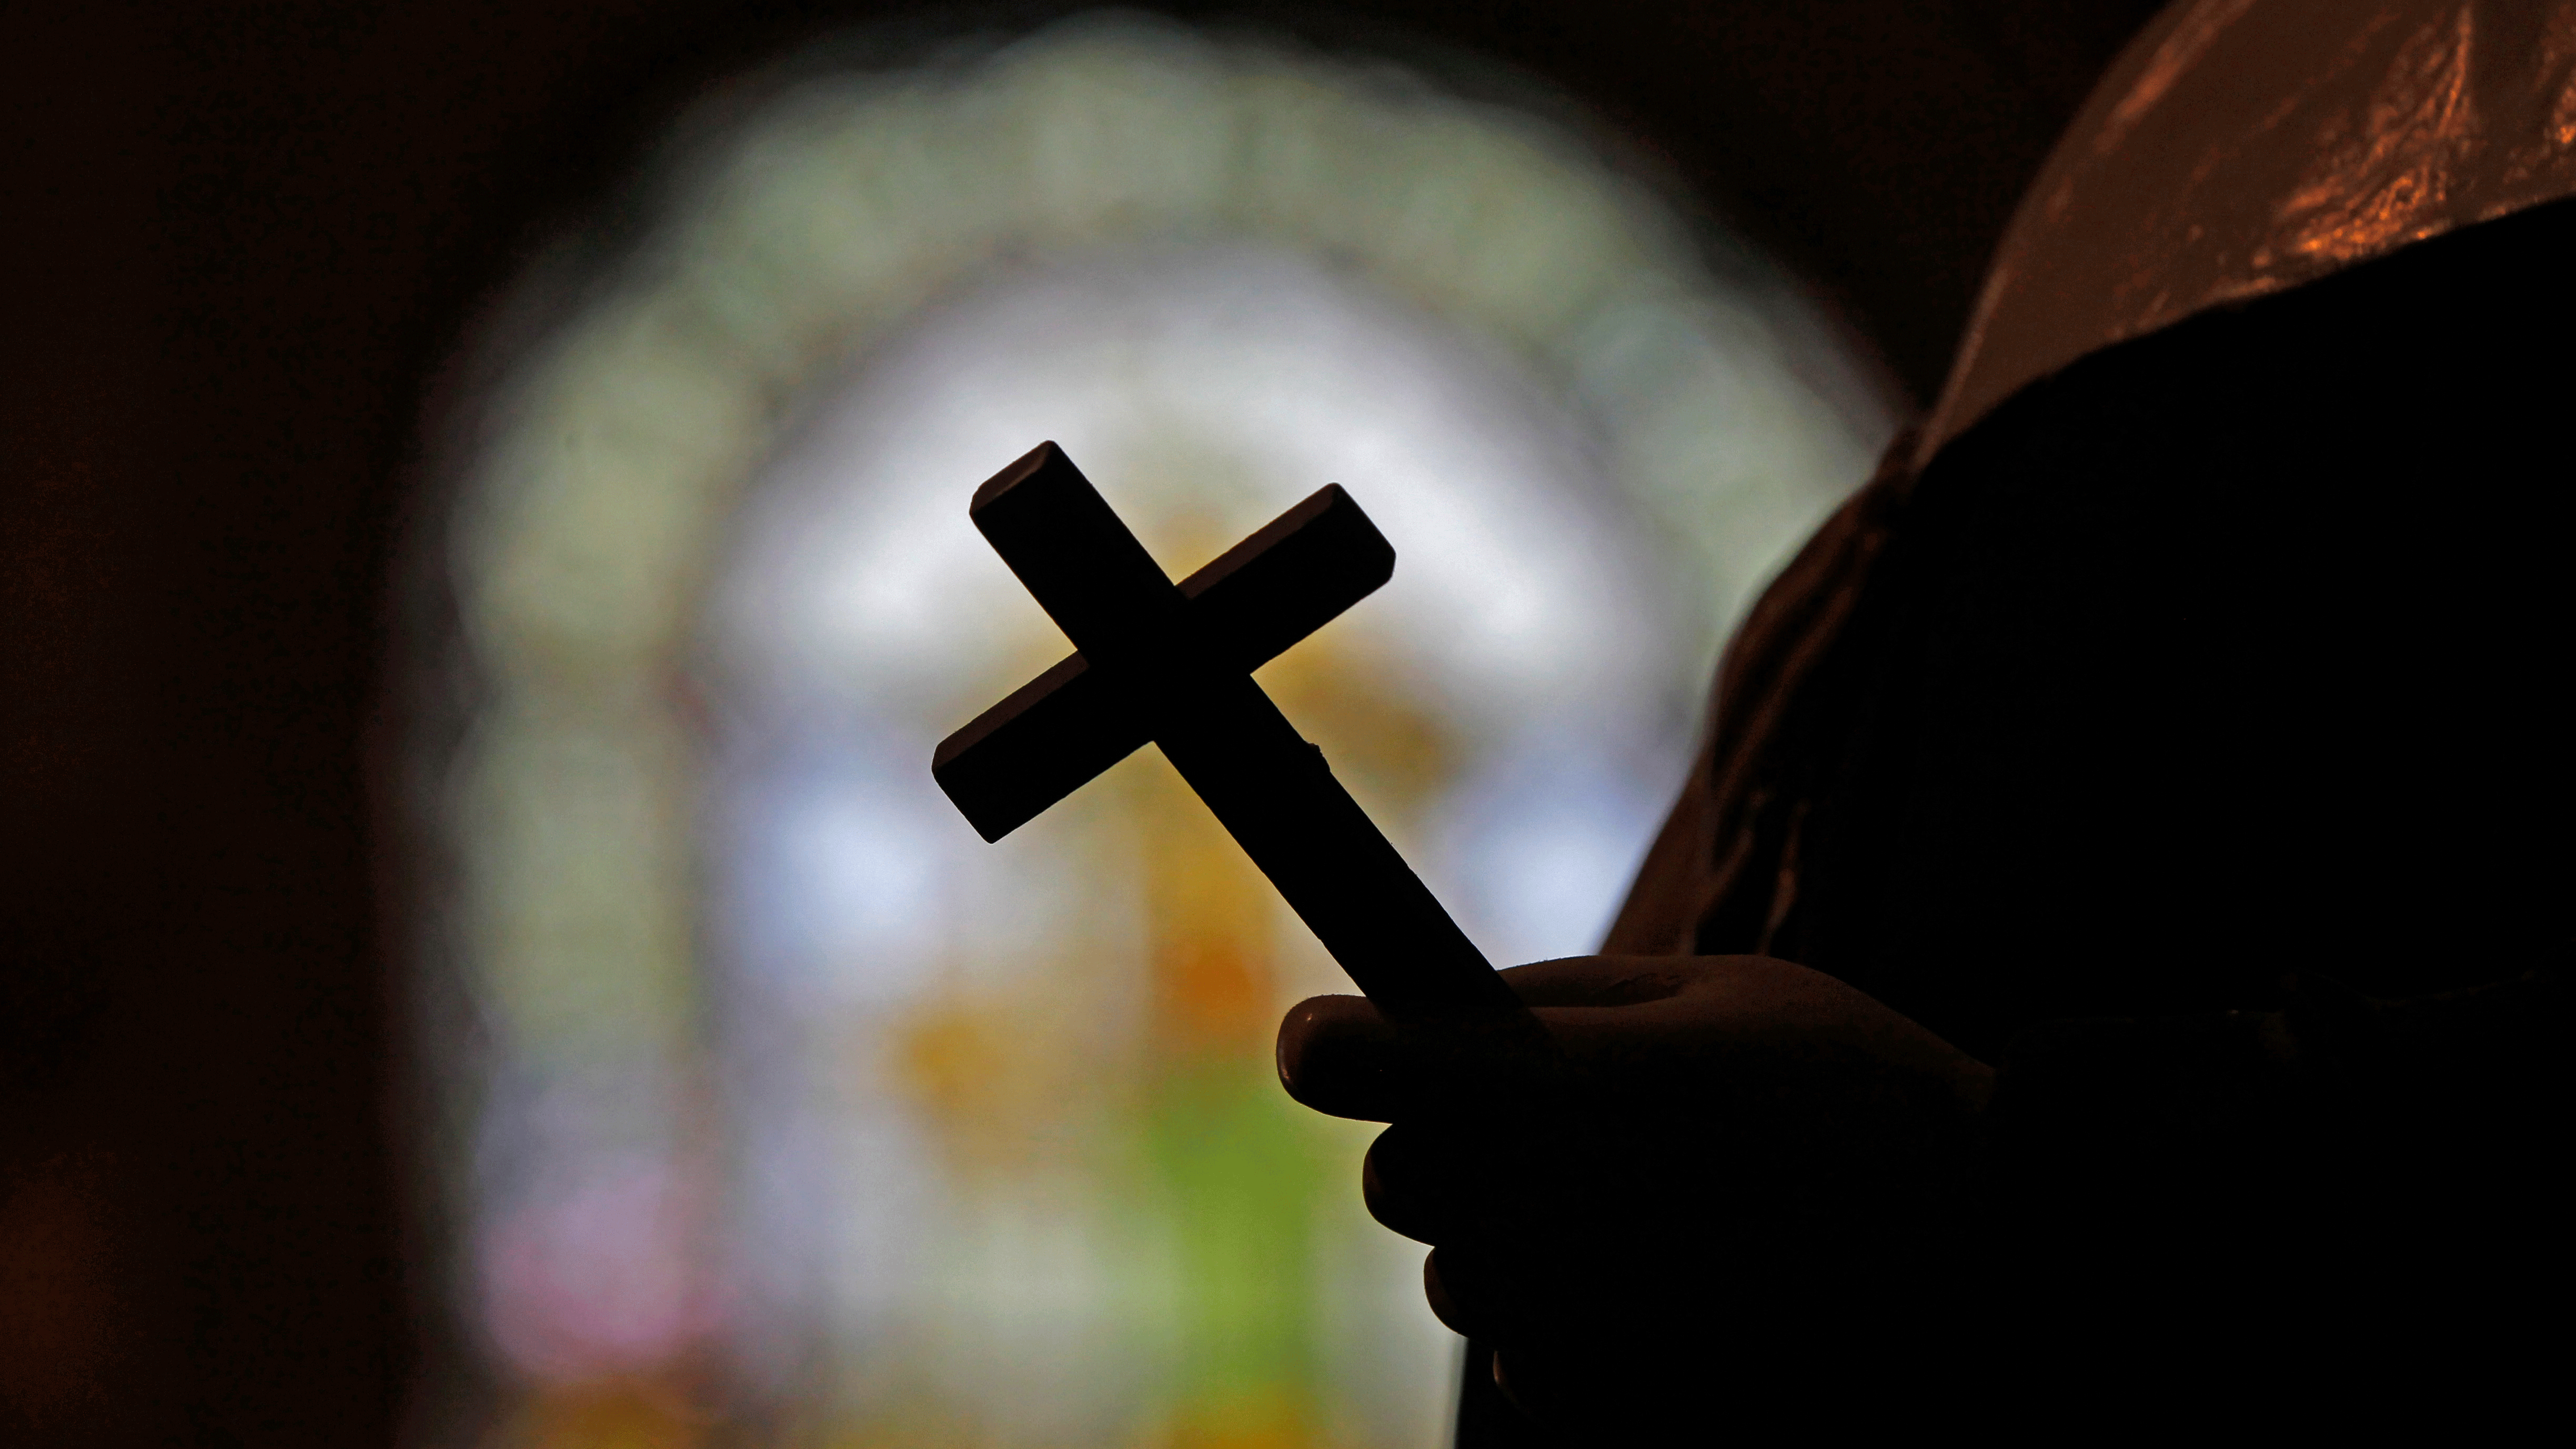 File photo shows a silhouette of a crucifix and a stained glass window inside a Catholic Church in New Orleans. 